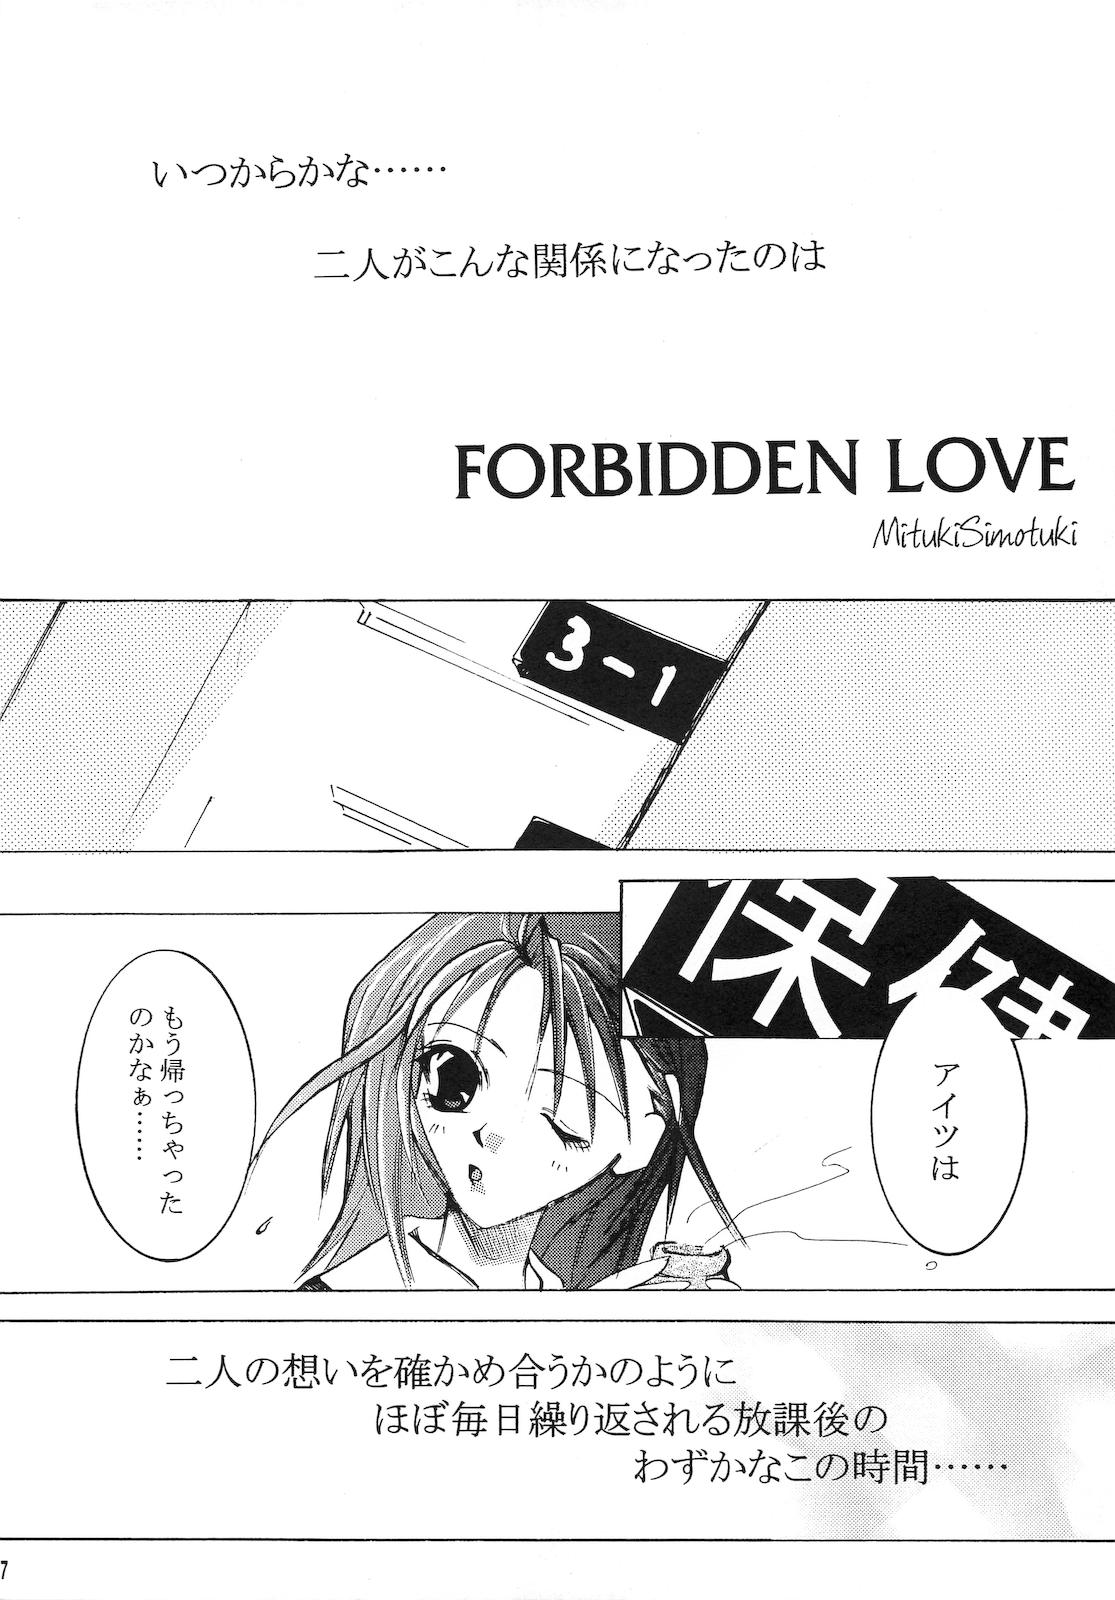 Spy Forbidden Love - With you Exgirlfriend - Page 6